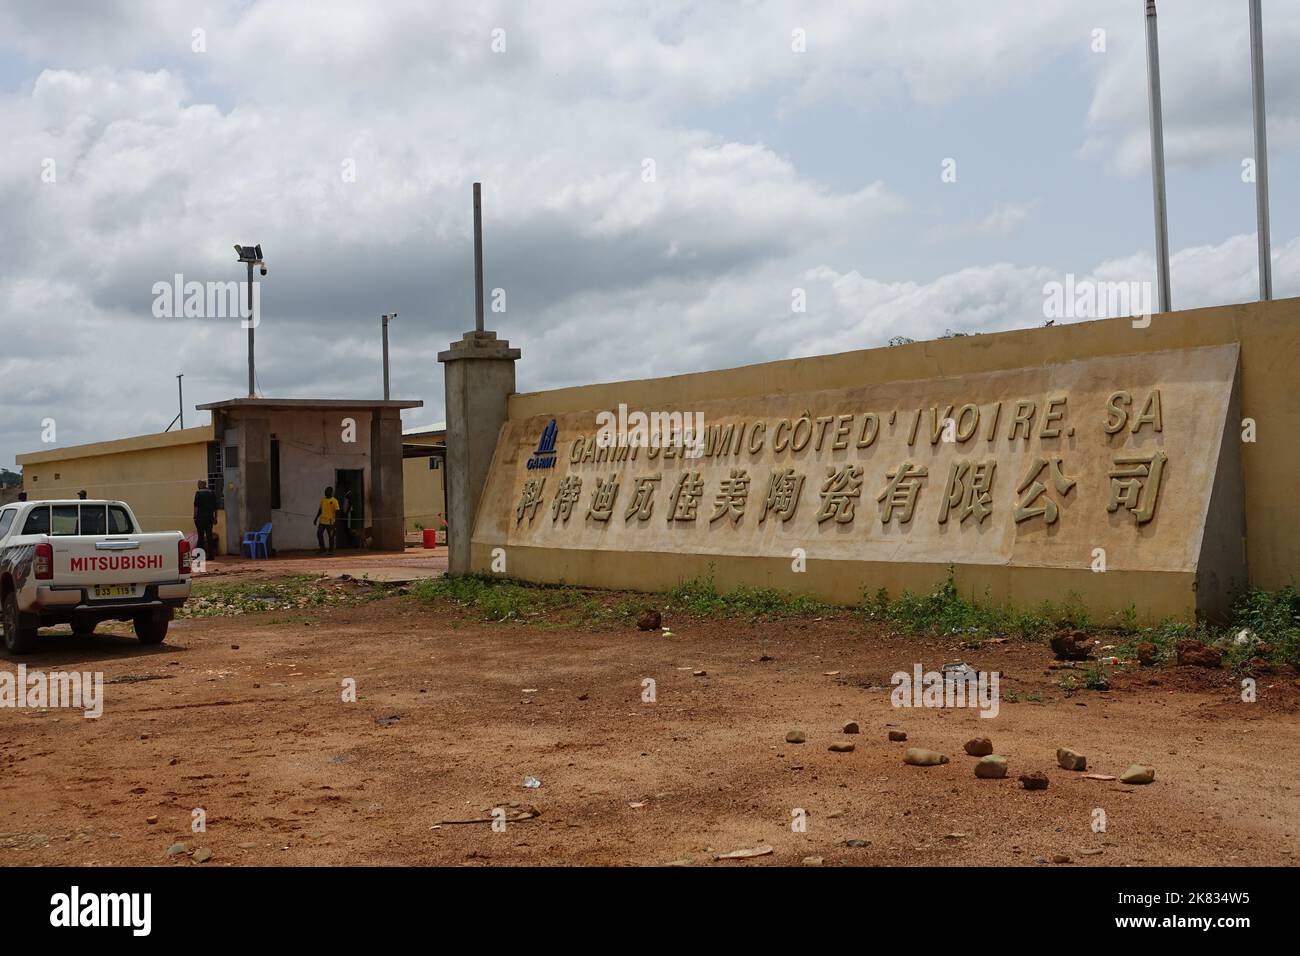 A Chinese ceramics factory in the Yamoussoukro industrial zone Stock Photo